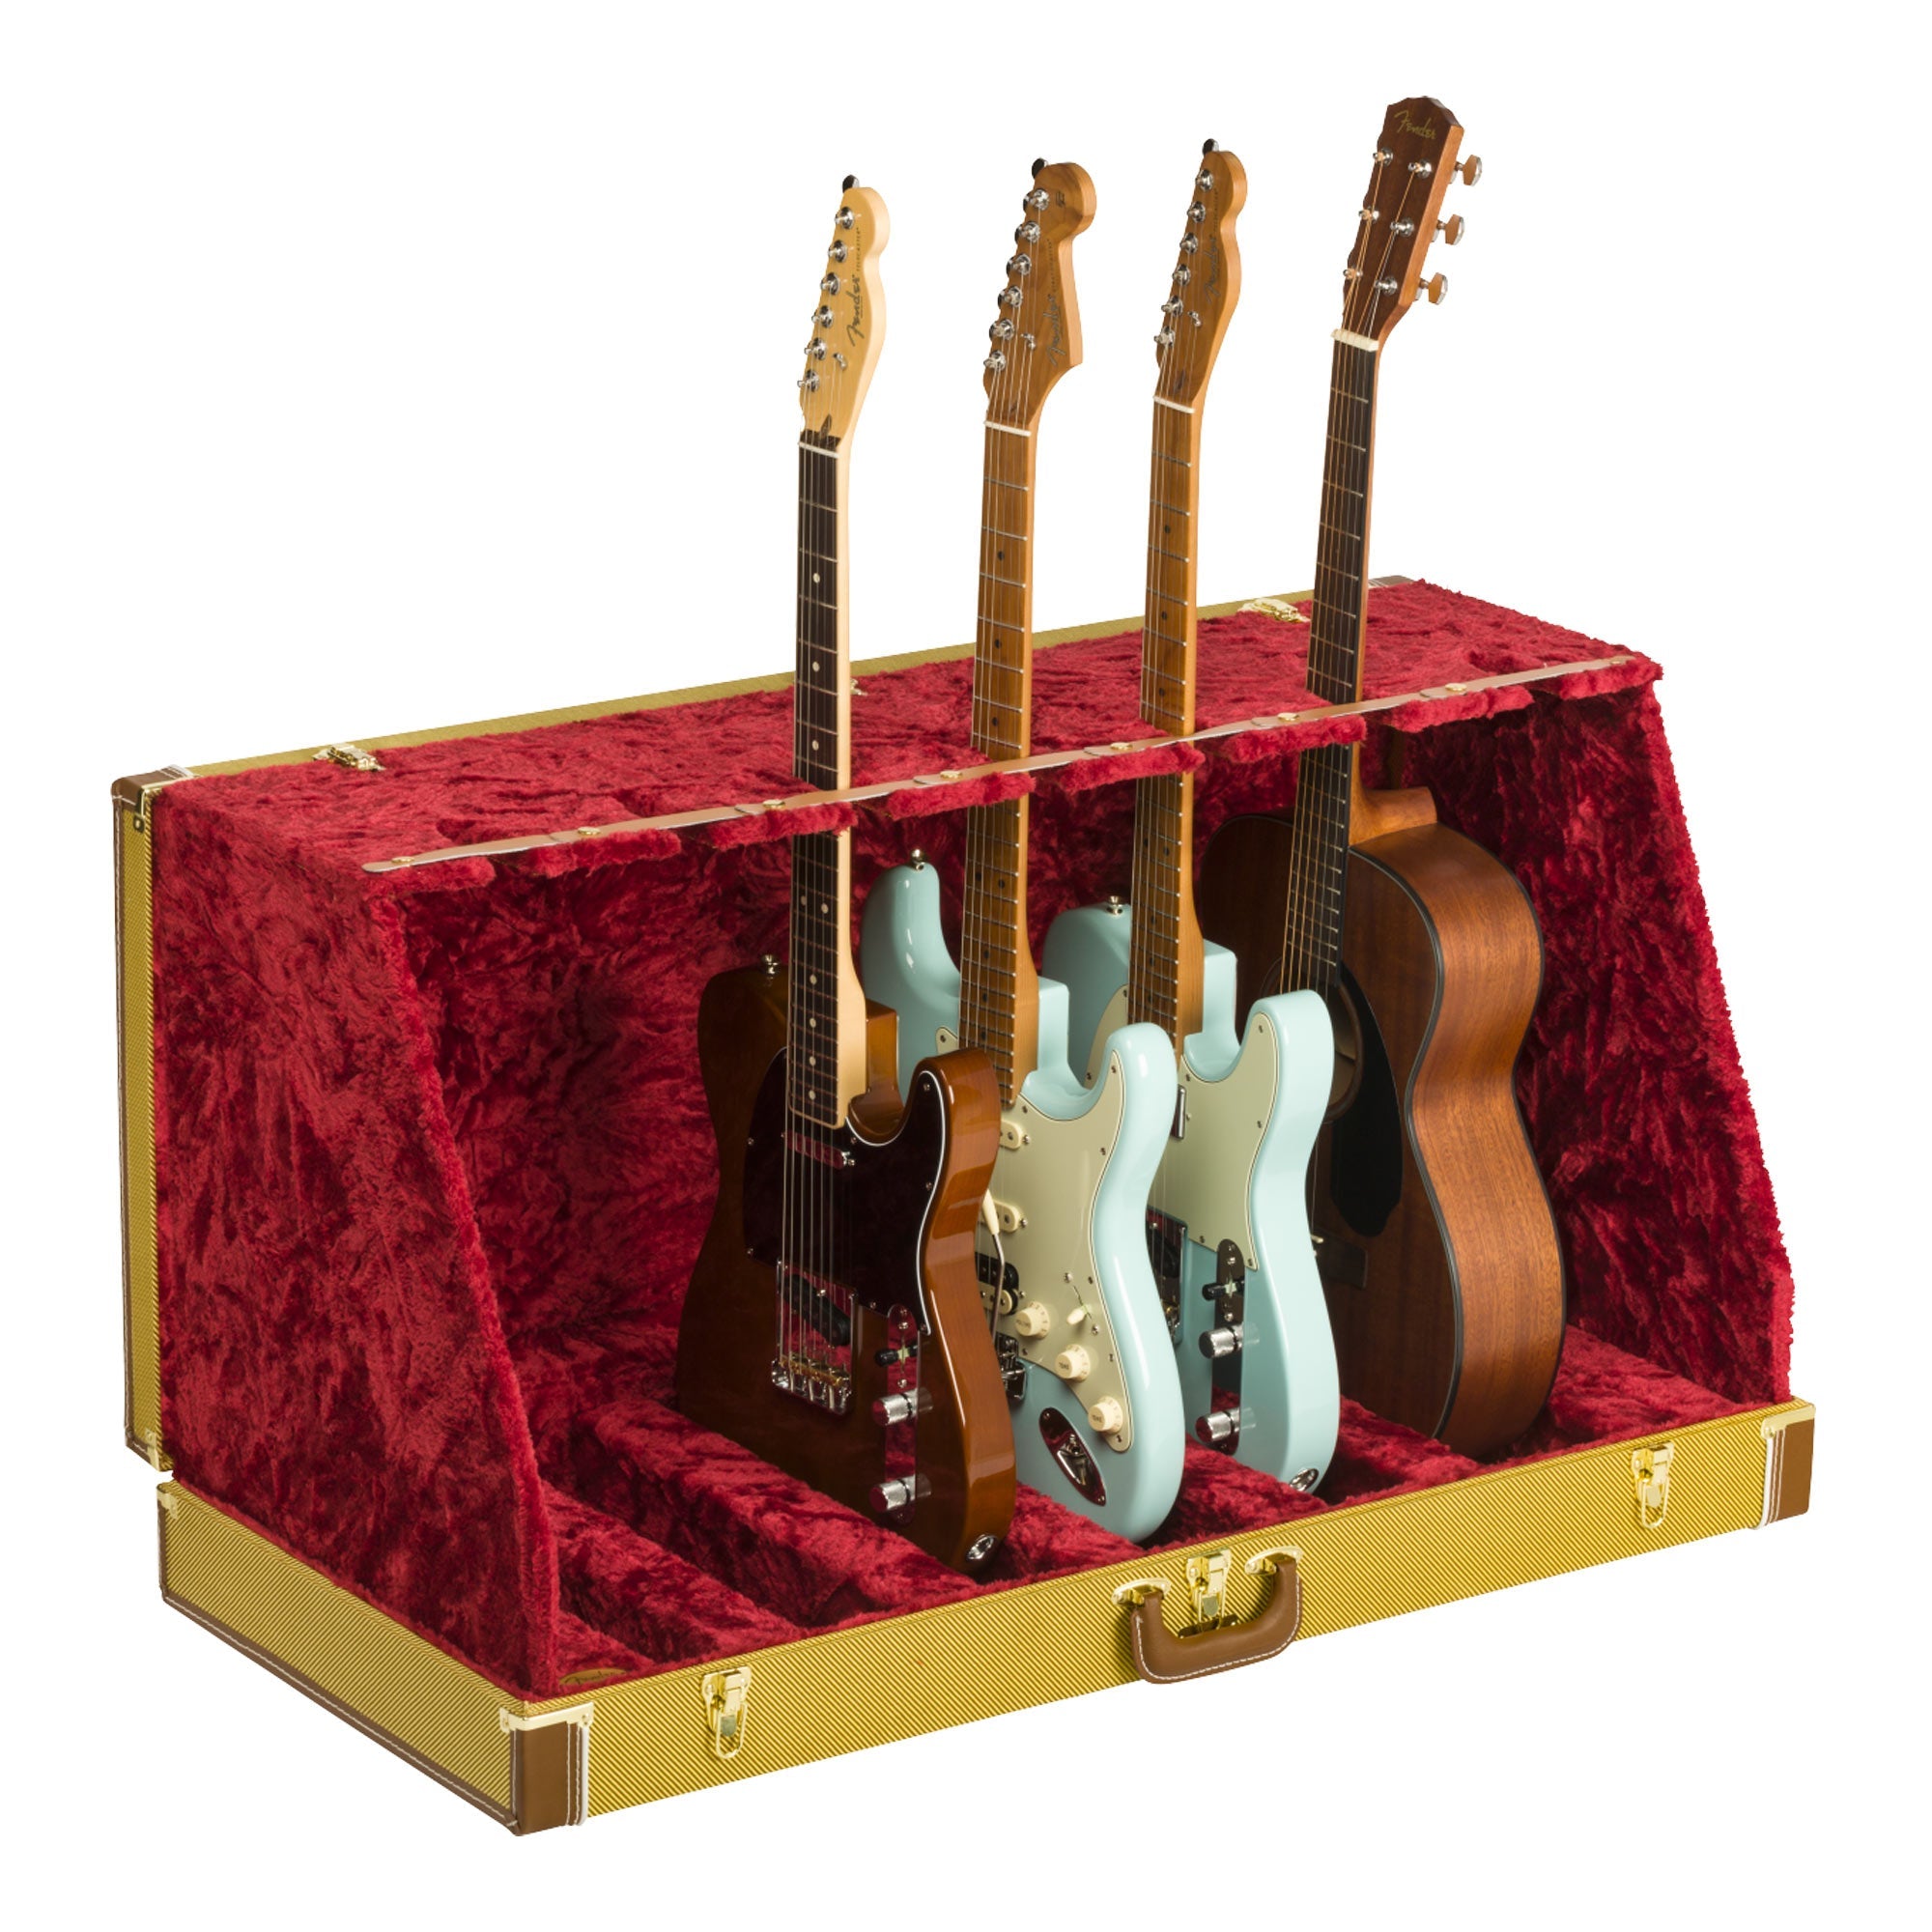 Tweed　Case　Stand　Fender　Classic　7-Guitar　Series　The　Music　Zoo